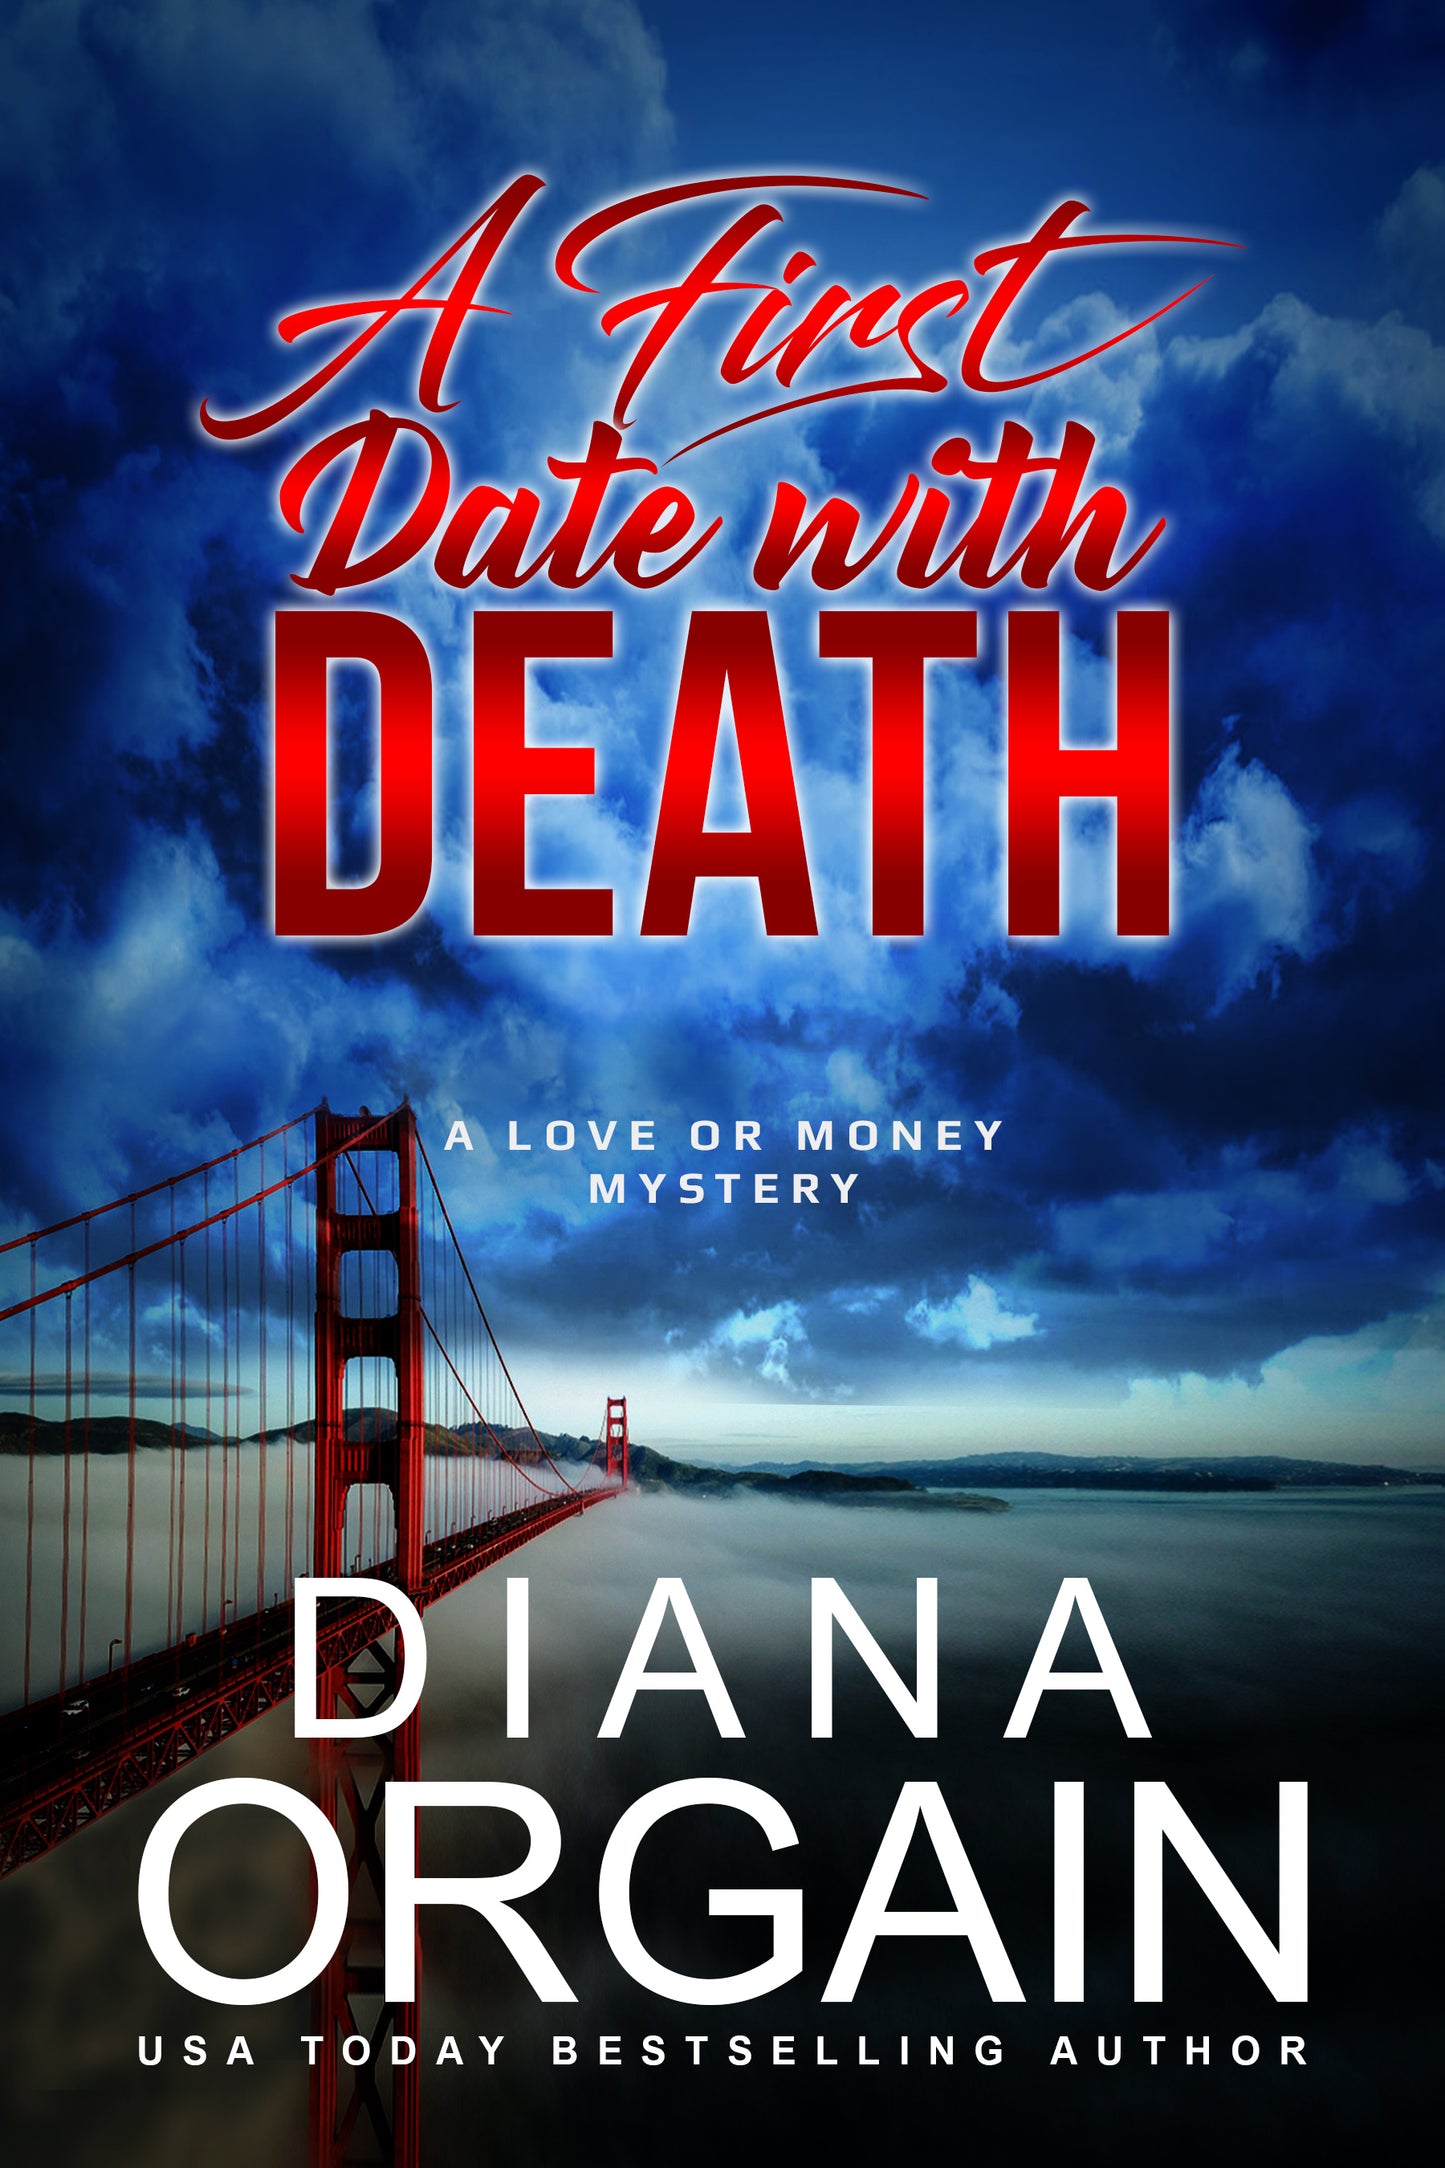 Love or Money Mystery Trilogy - Diana Orgain